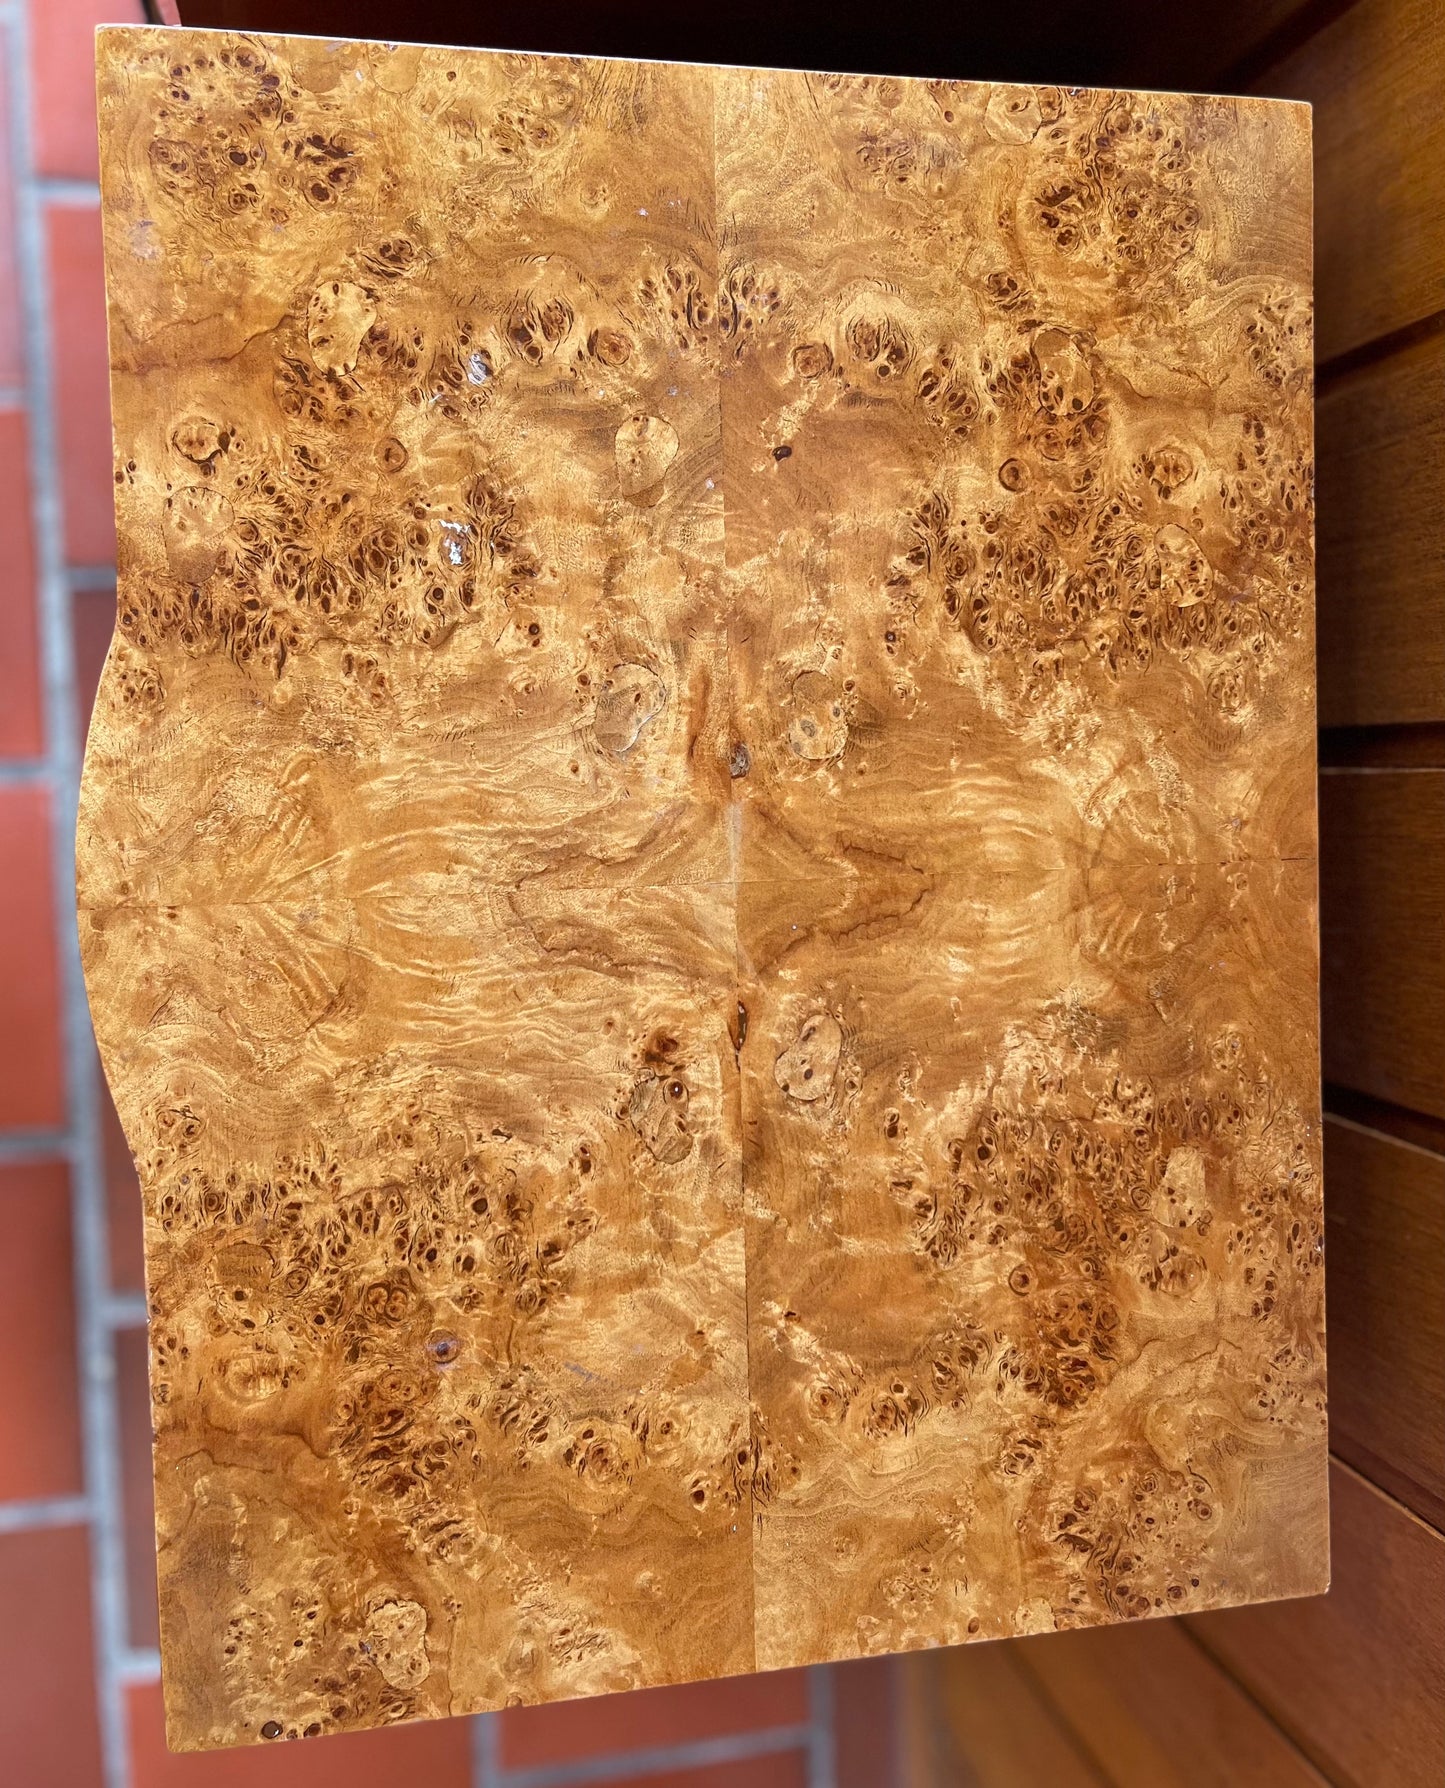 Pair of Burl Bedside Tables